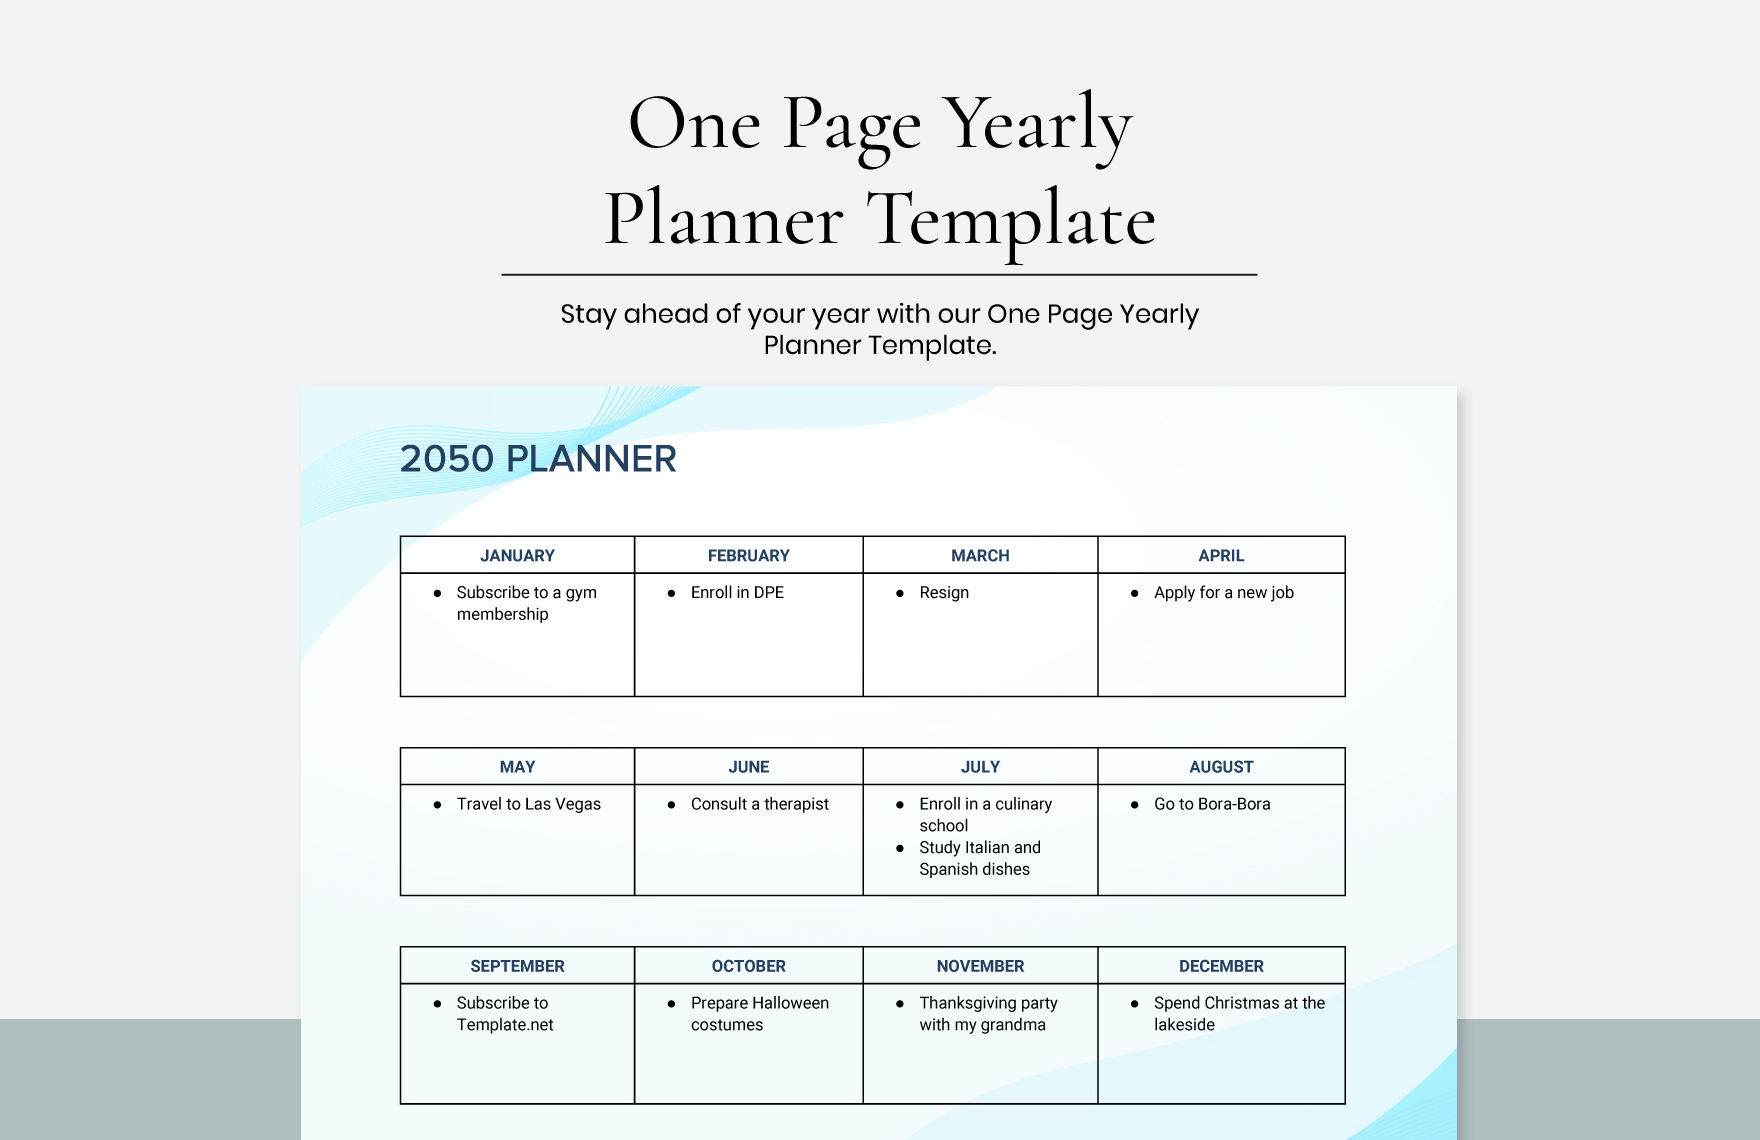 Free One Page Yearly Planner Template in Word, Google Docs